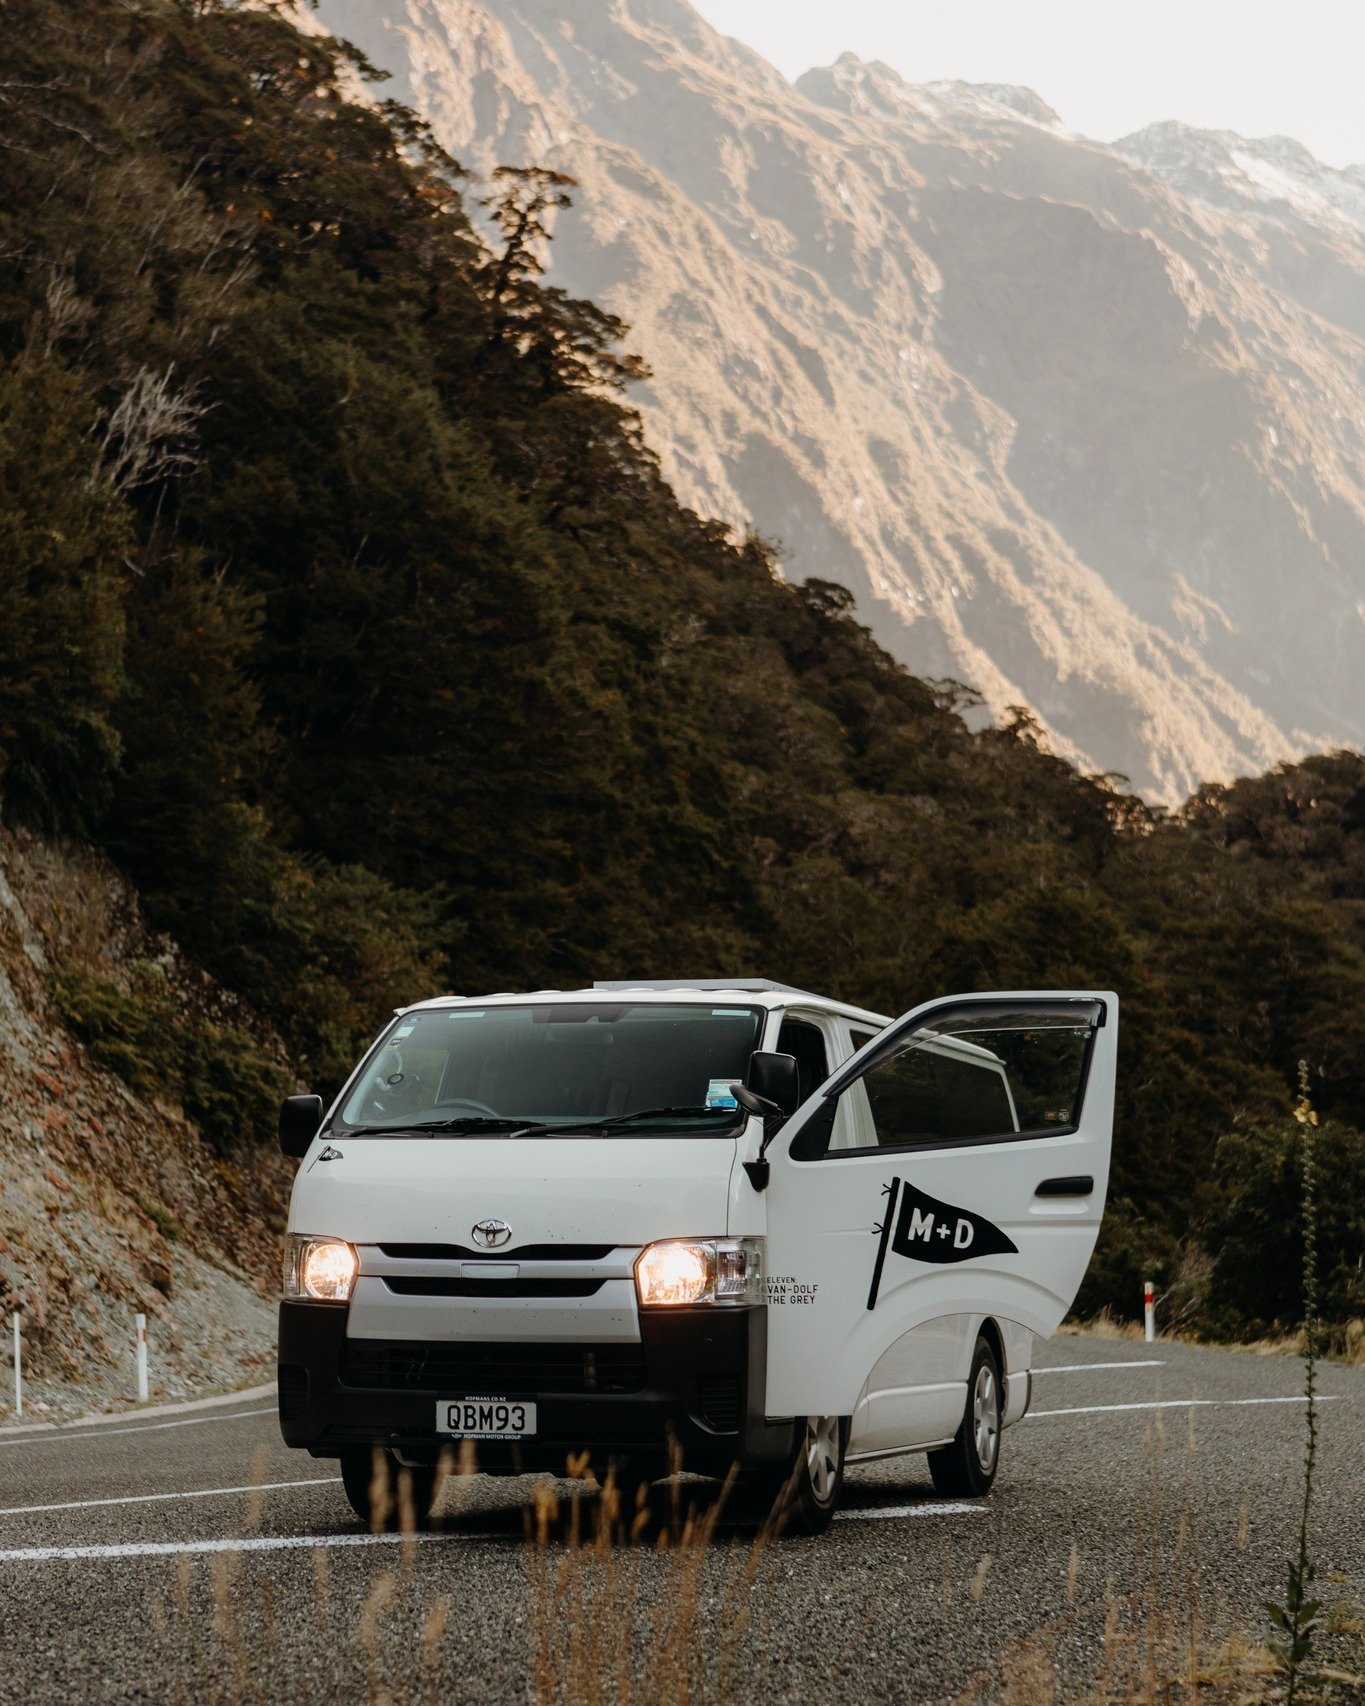 The lovely Ash &amp; Dorian making the most of their easter weekend by heading down to Milford Sound on the most picturesque van trip. Definitely a must do on your South Island trip.

Want to know our other must do's? Check out our trip itineraries w